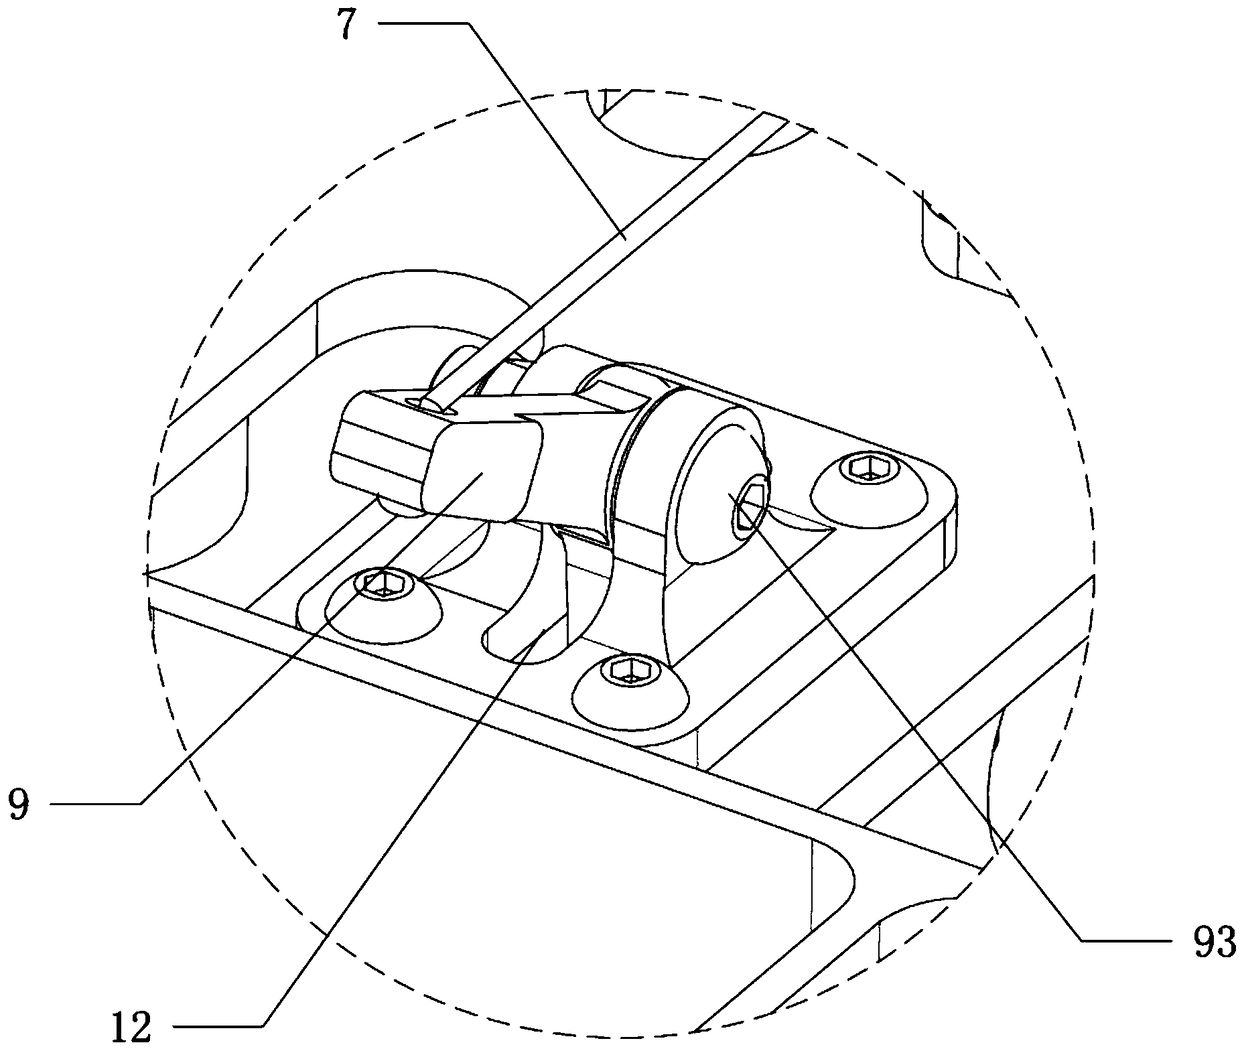 A lock release mechanism for ejection take-off of small unmanned aerial vehicle